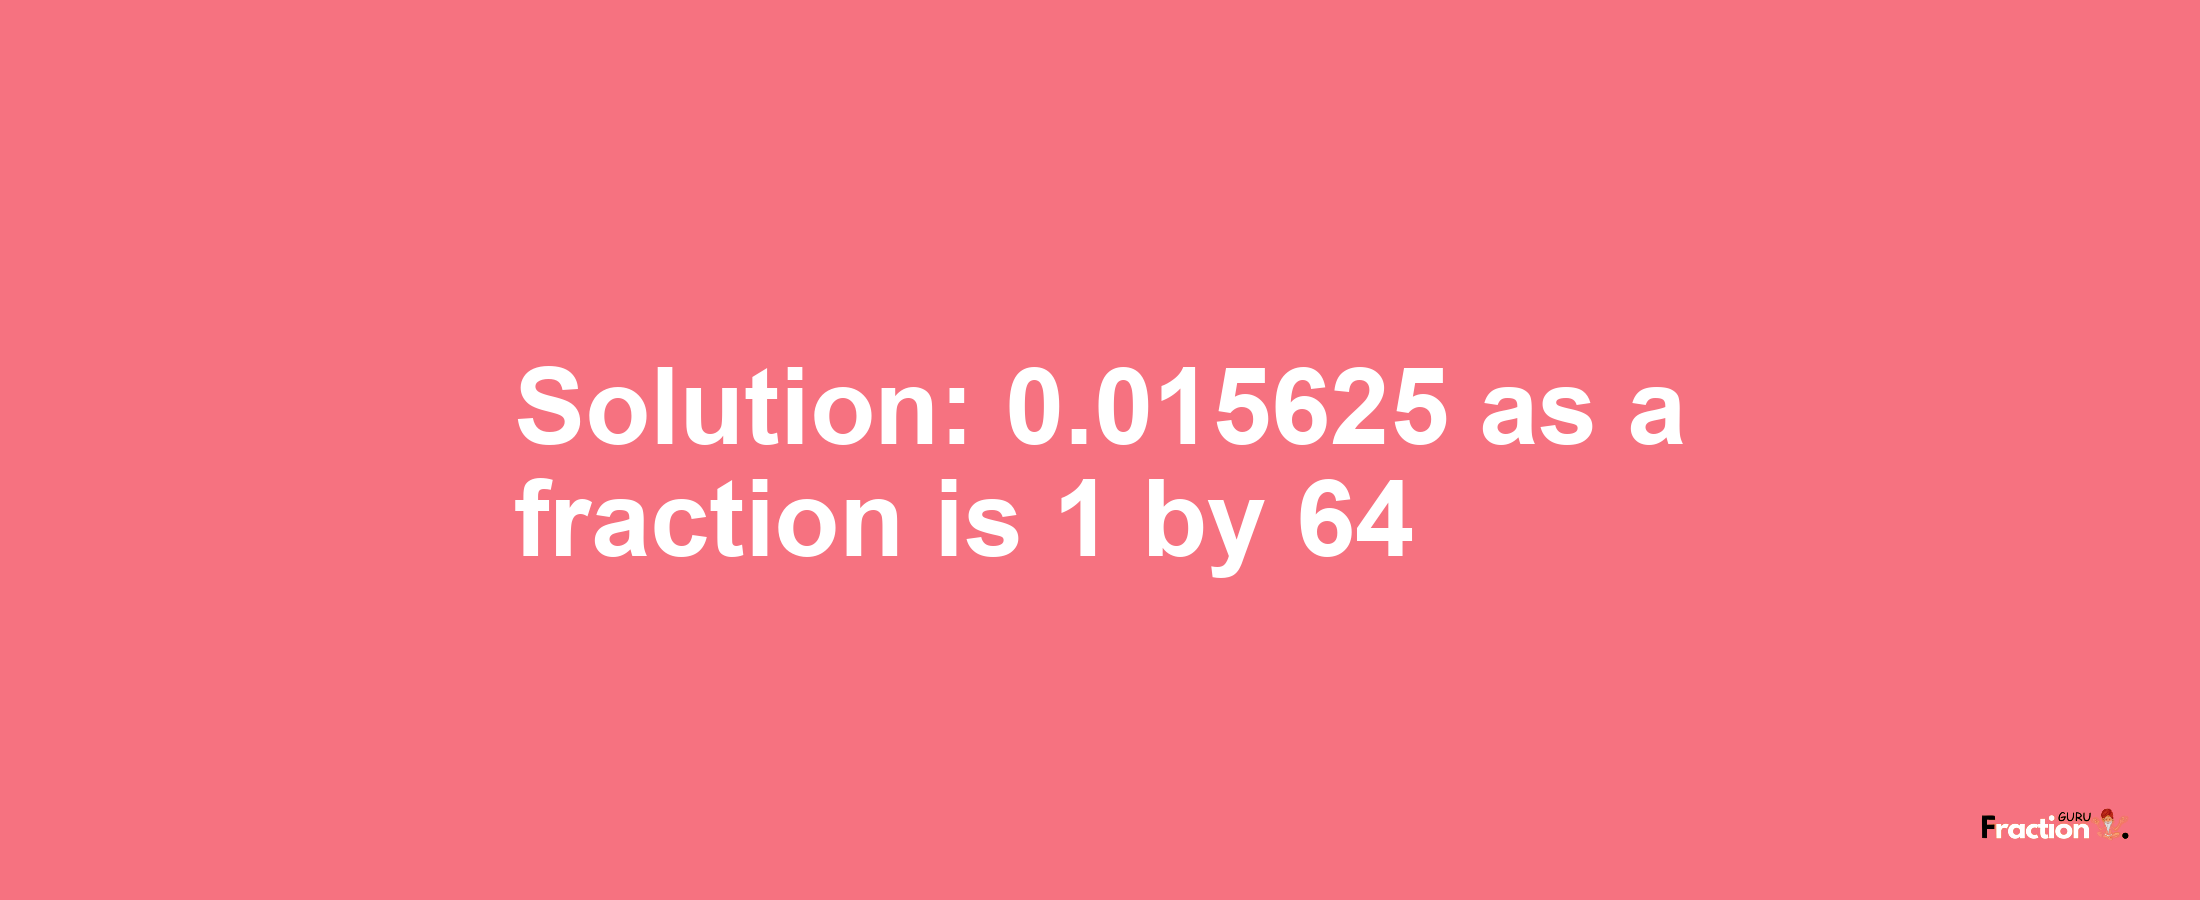 Solution:0.015625 as a fraction is 1/64